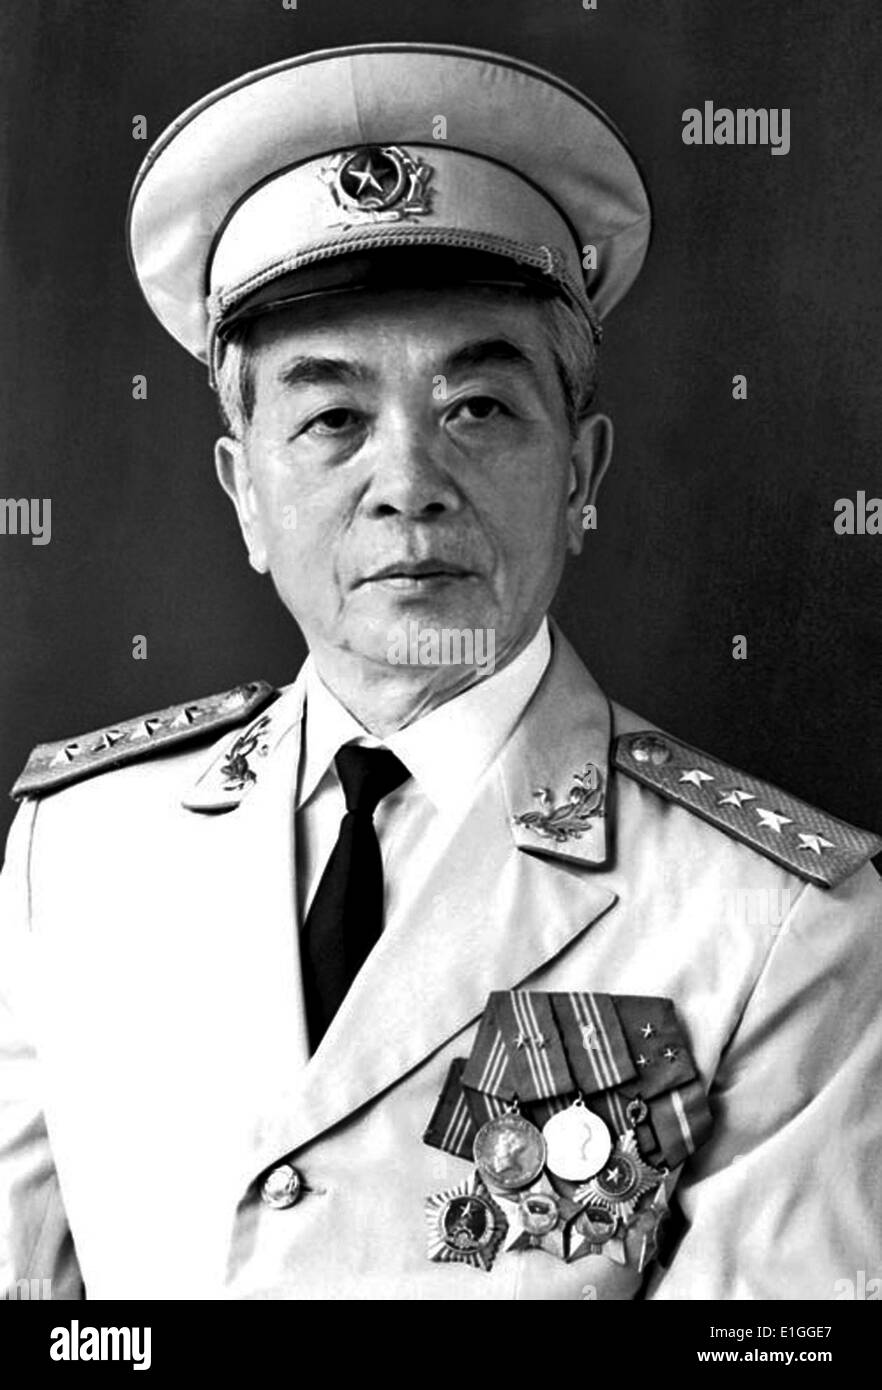 Võ Nguyên Giáp  1911 – 4 October 2013) General in the Vietnam People's Army and politician. He first grew to prominence during World War II, where he served as the military leader of the Viet Minh resistance against the Japanese occupation of Vietnam. Giáp was a principal commander in two wars: the First Indochina War (1946–54) and the Vietnam War (1960–1975). He participated in the following historically significant battles: Lạng Sơn (1950), Hòa Bình (1951–52), Điện Biên Phủ (1954), the Tết Offensive (1968), the Easter Offensive (1972), and the final Ho Chi Minh Campaign (1975). Stock Photo